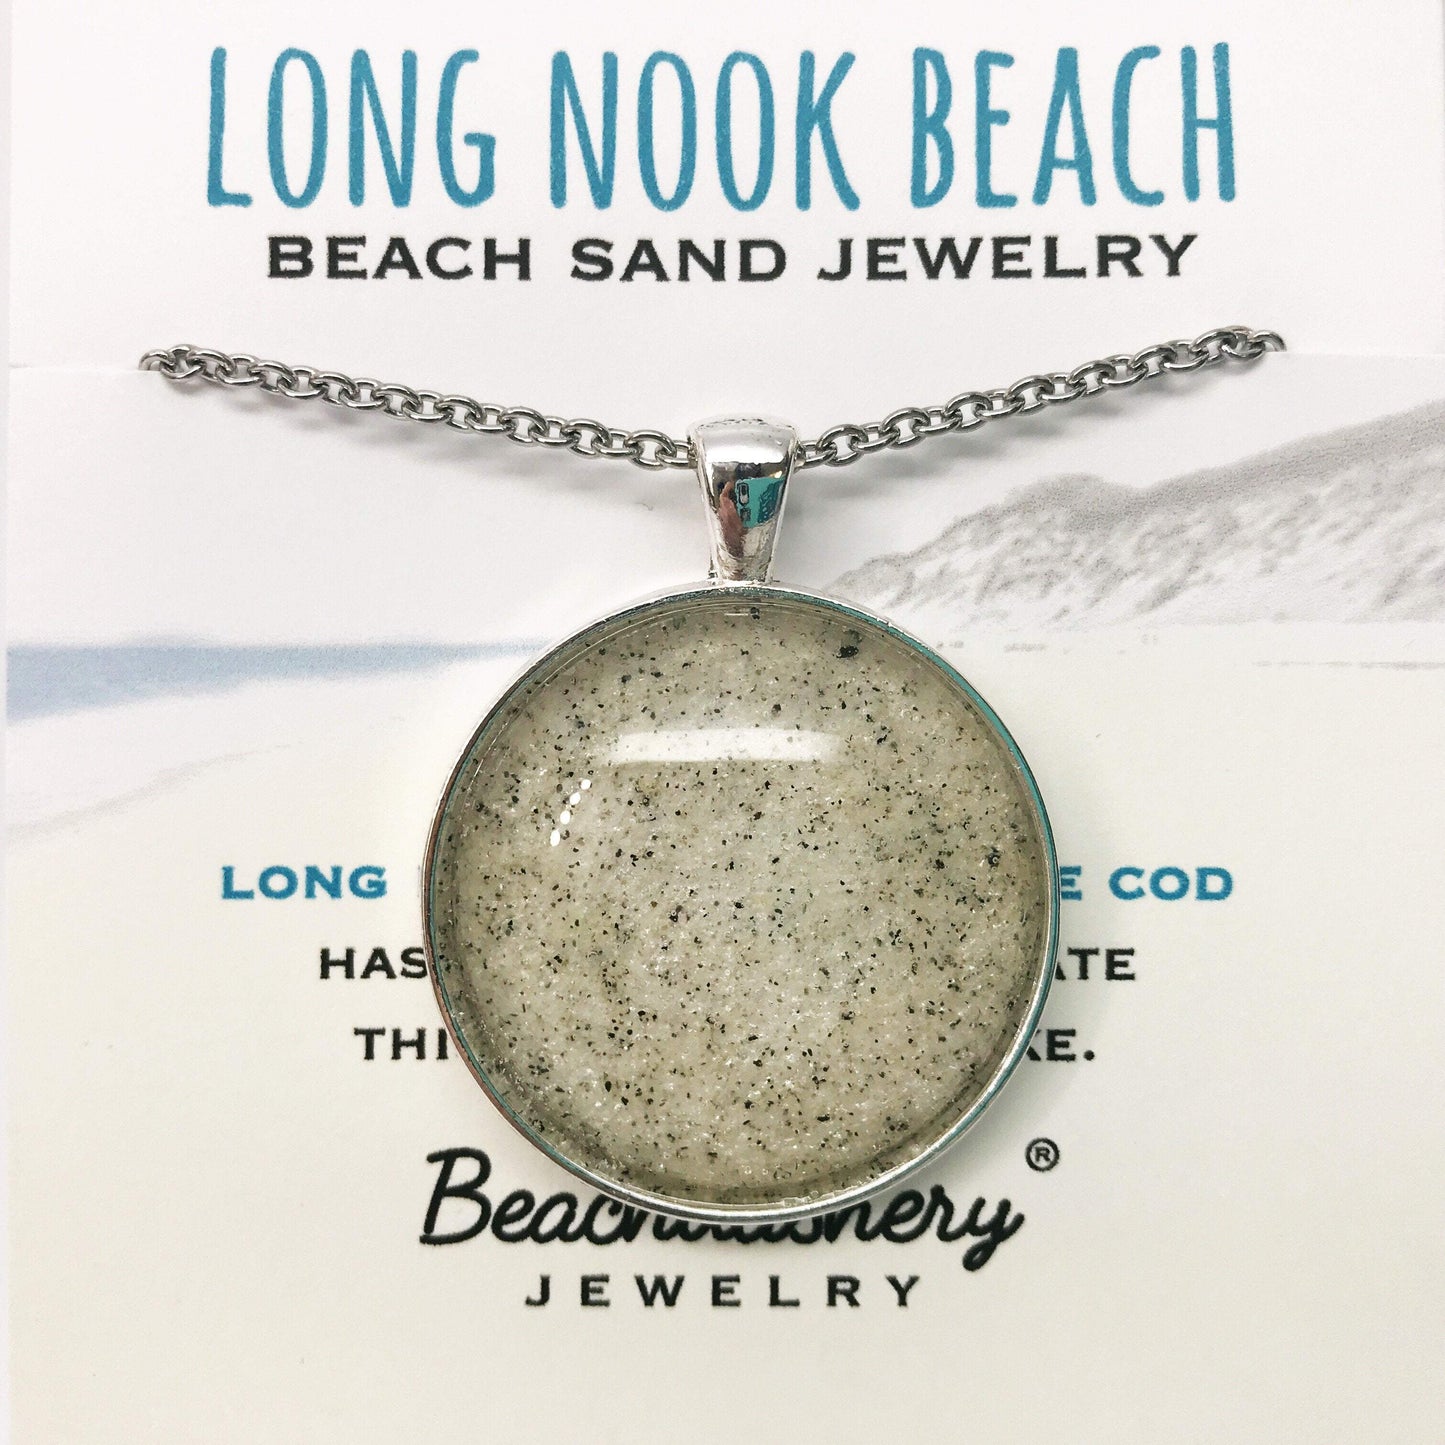 Load image into Gallery viewer, Long Nook Beach Sand Jewelry Beachdashery
